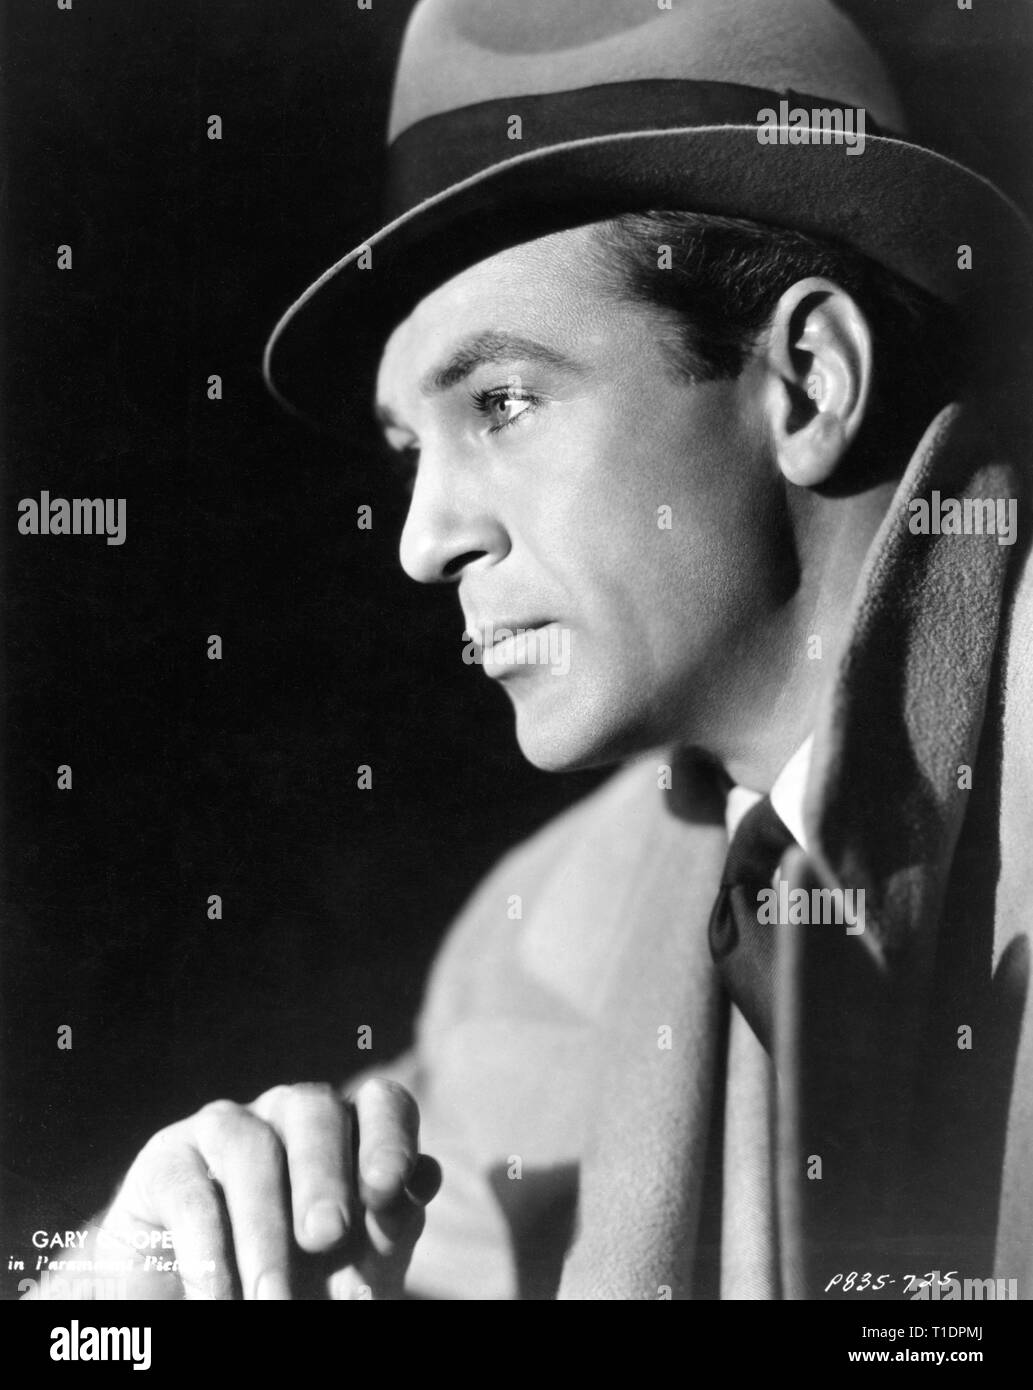 GARY COOPER 1933 Portrait Classical Hollywood Superstar Paramount Pictures Inc. Stock Photo